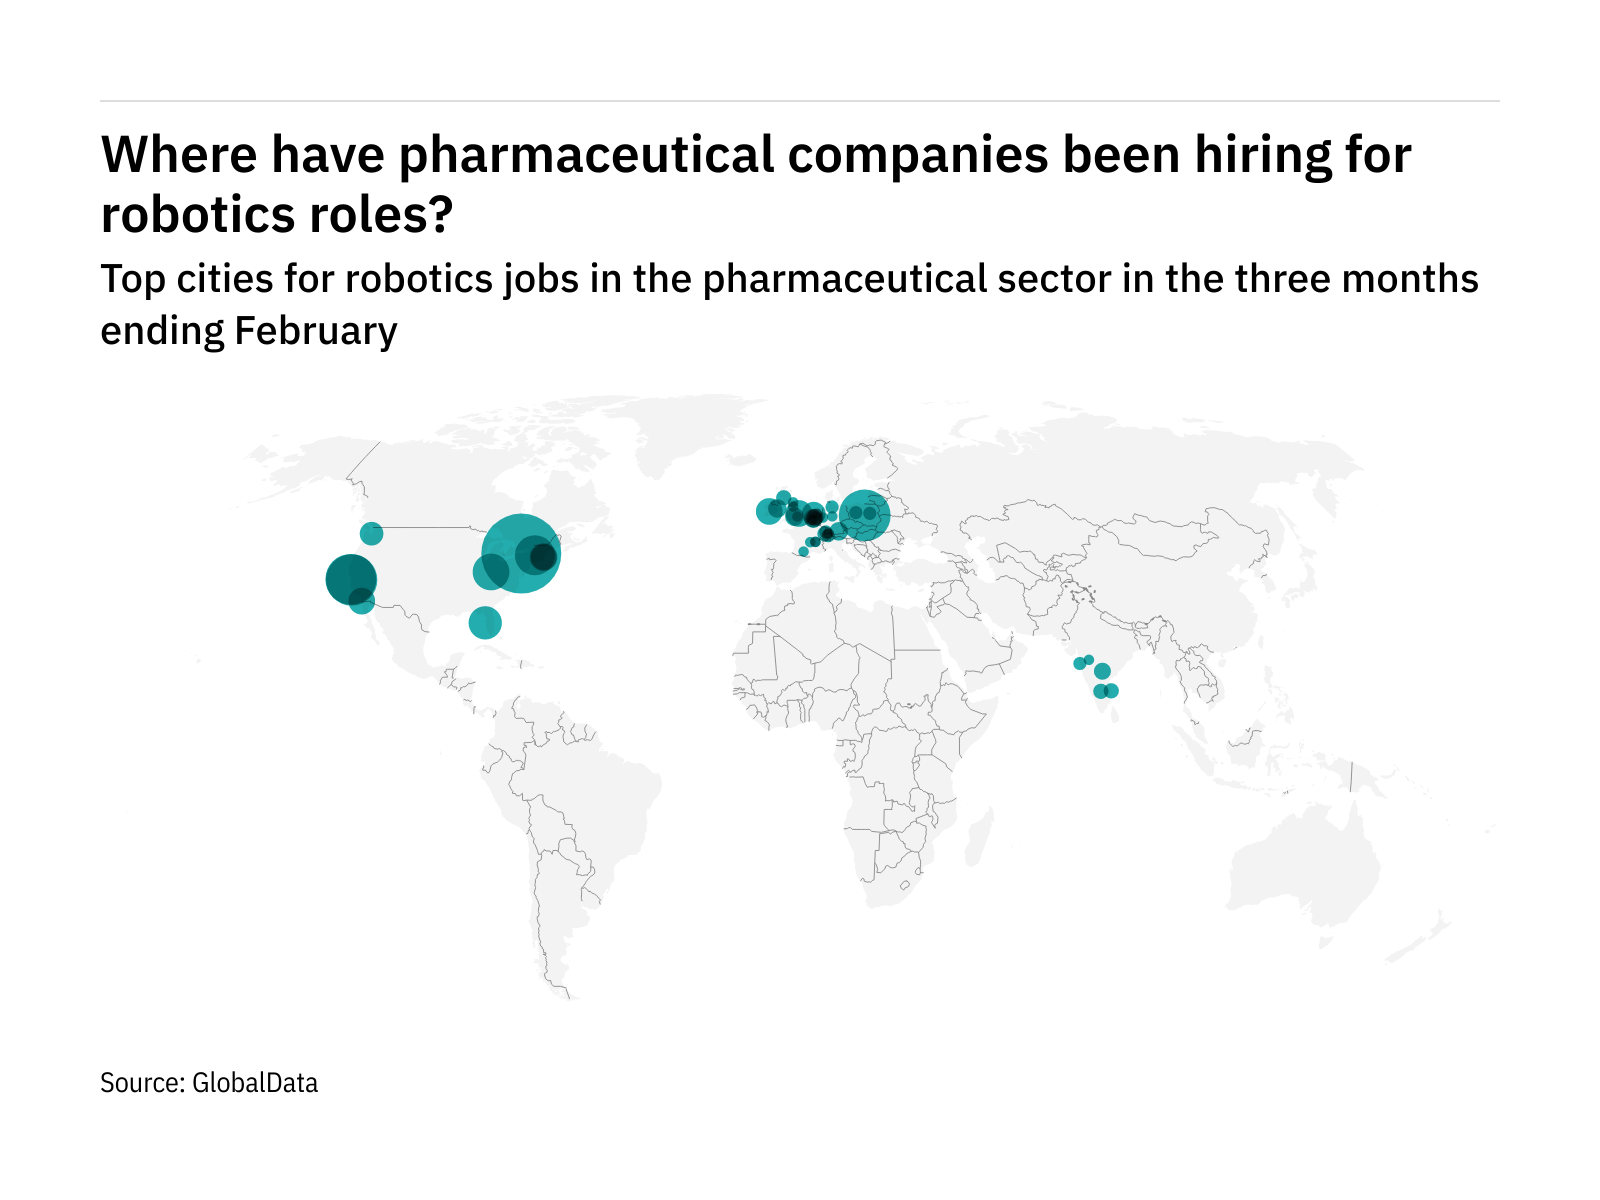 North America is seeing a hiring boom in pharmaceutical industry robotics roles